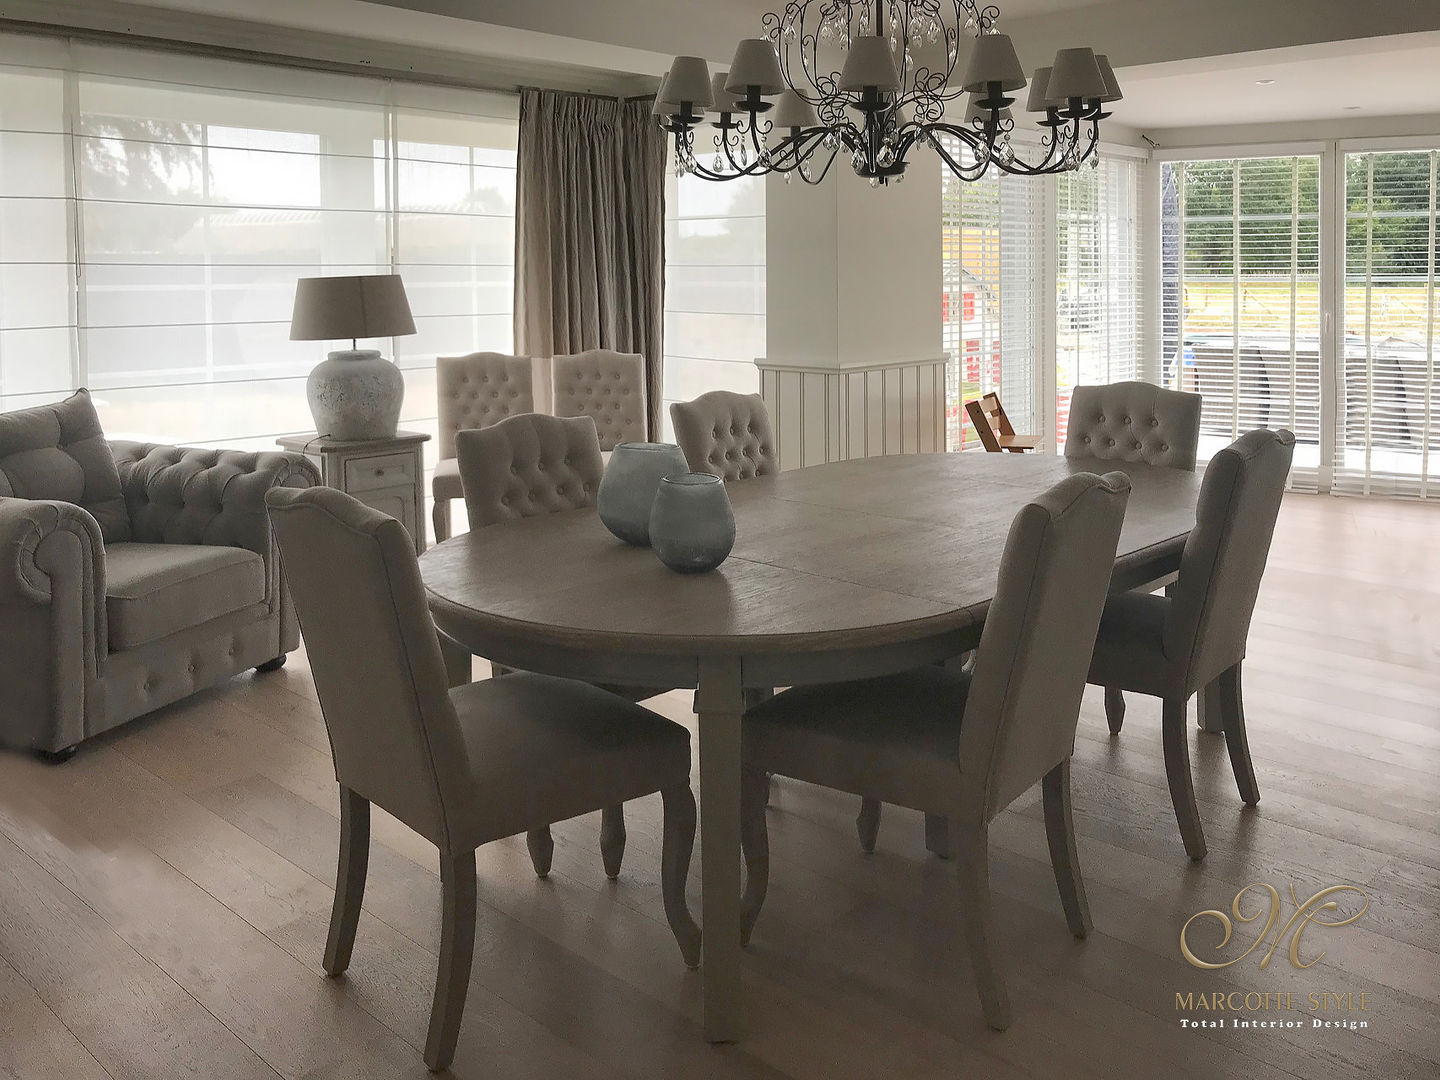 Totaal renovatie met meubelen, Marcotte Style Marcotte Style Country style dining room Fake Leather Metallic/Silver Chairs & benches